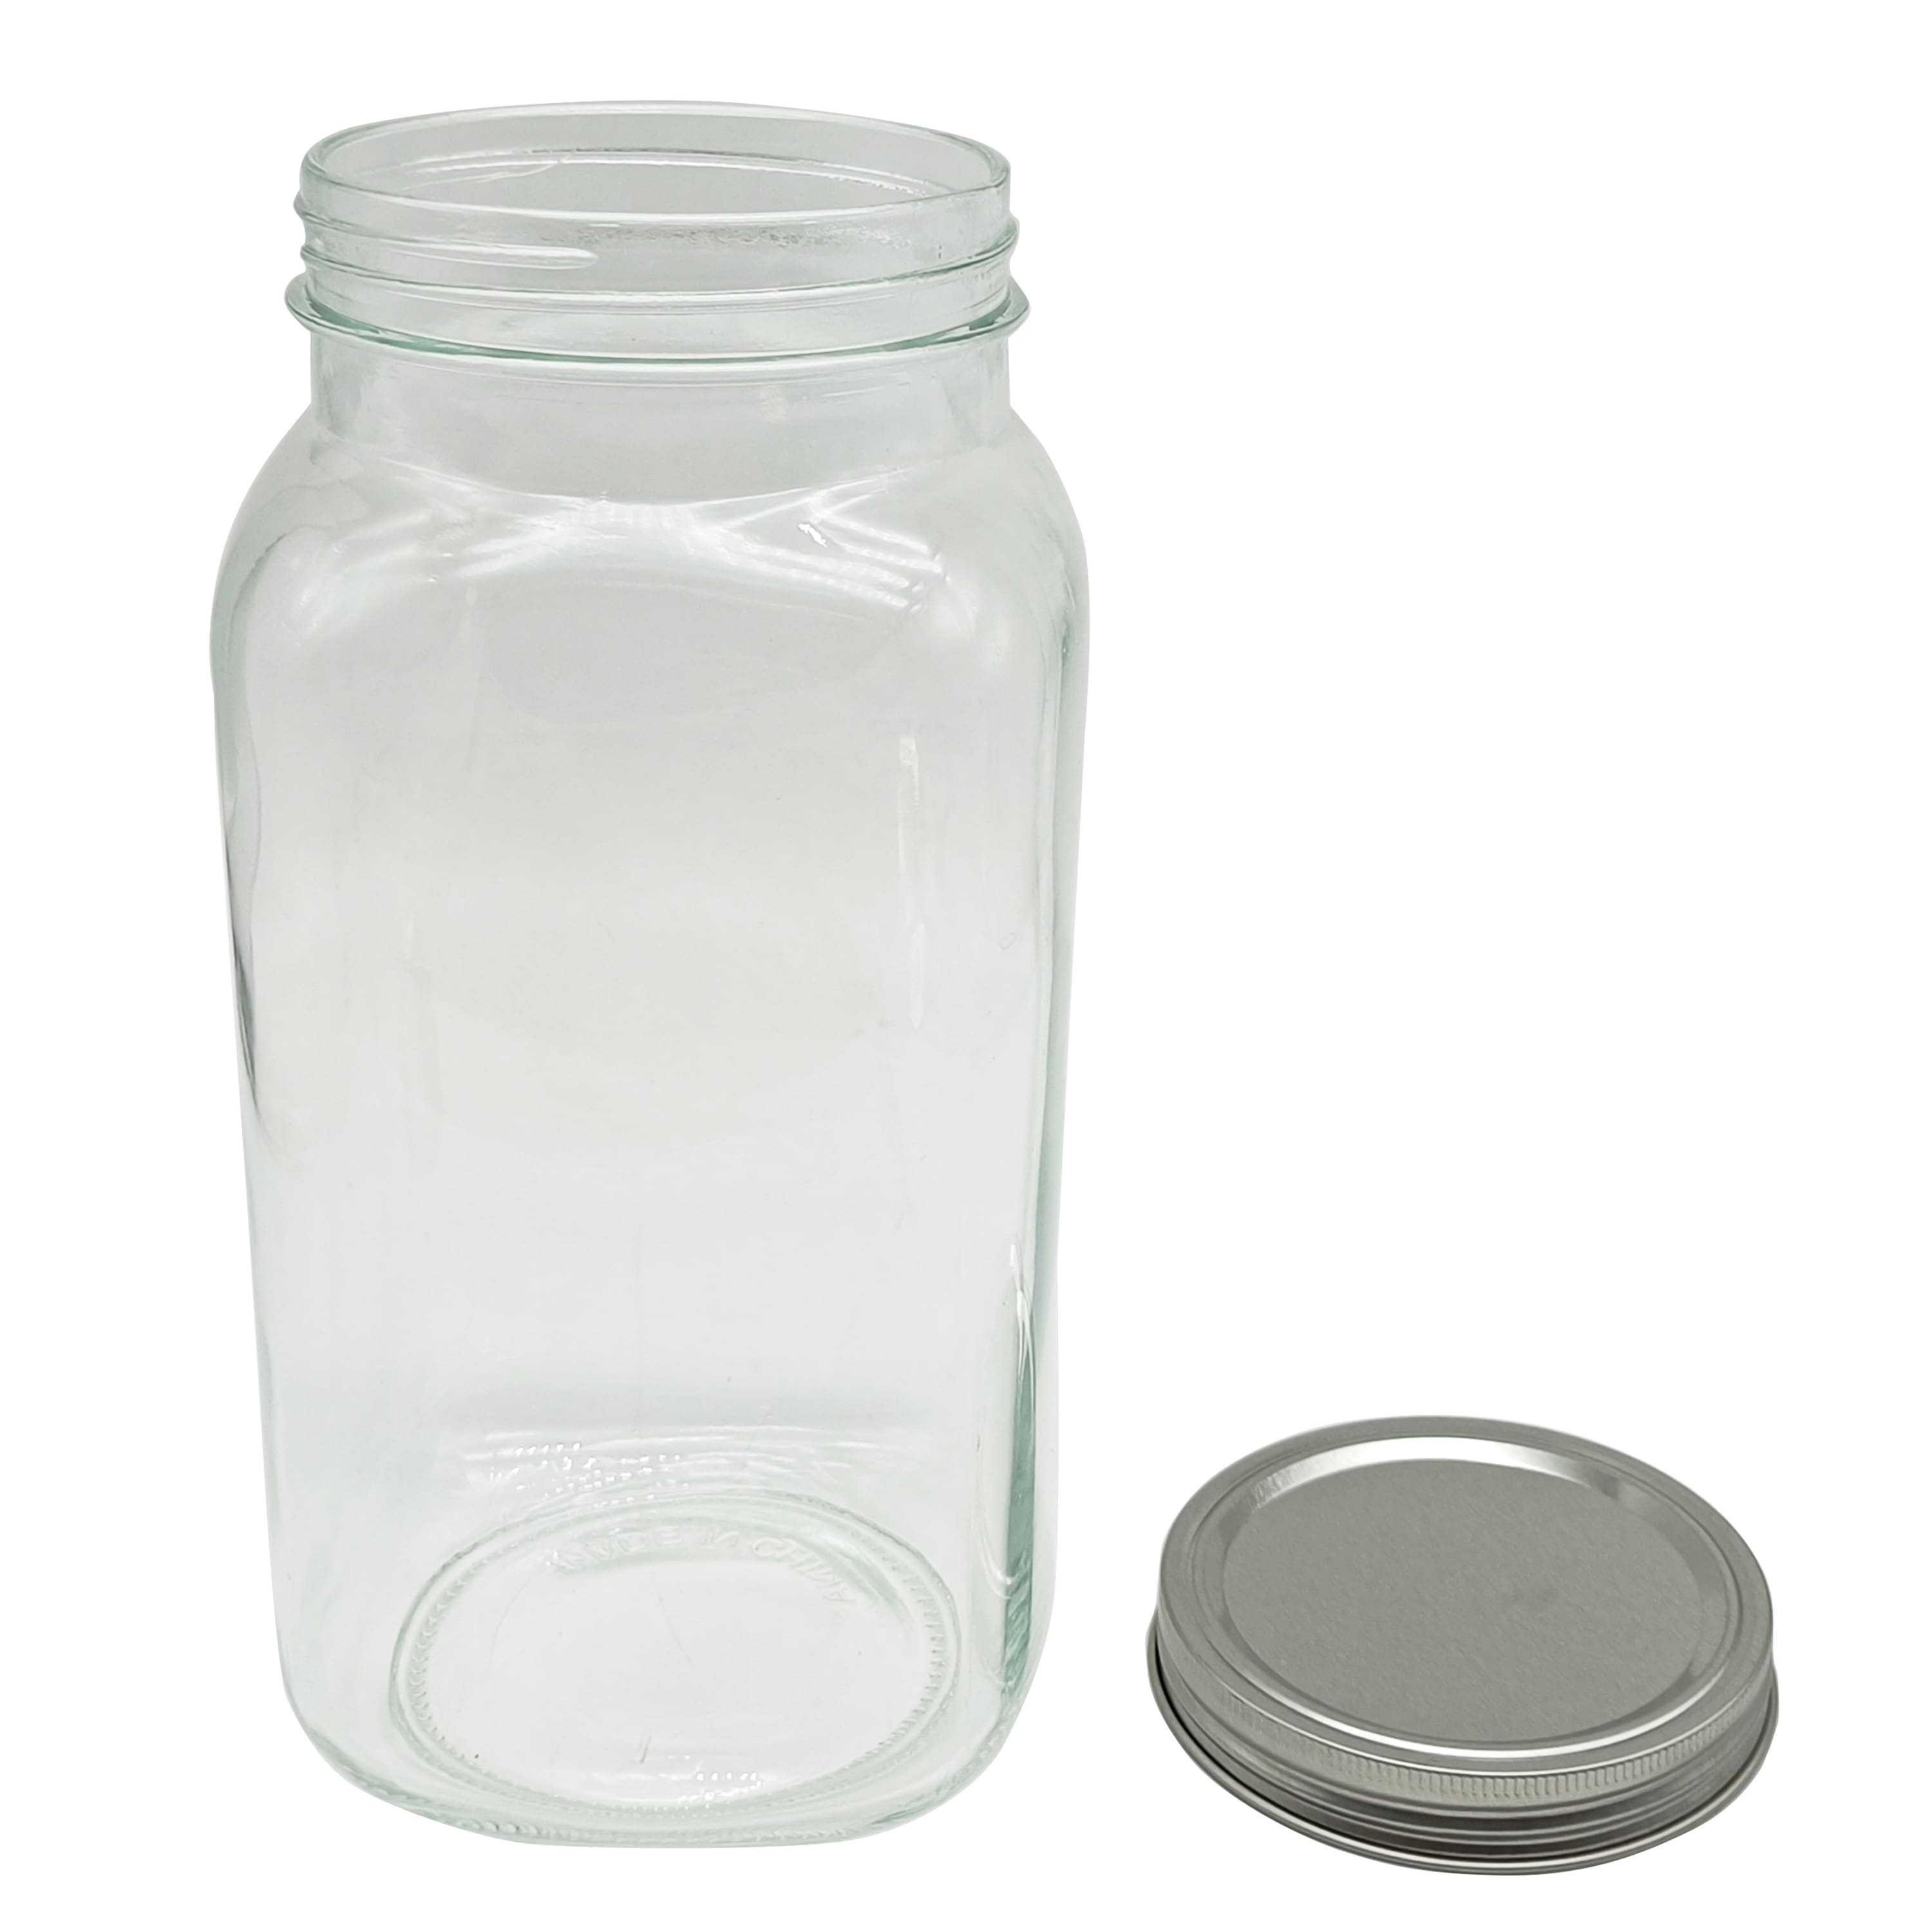 2 PACK - Clear Glass Round 2 Gallon Cookie Wedding Candy Jar with Glass Lid